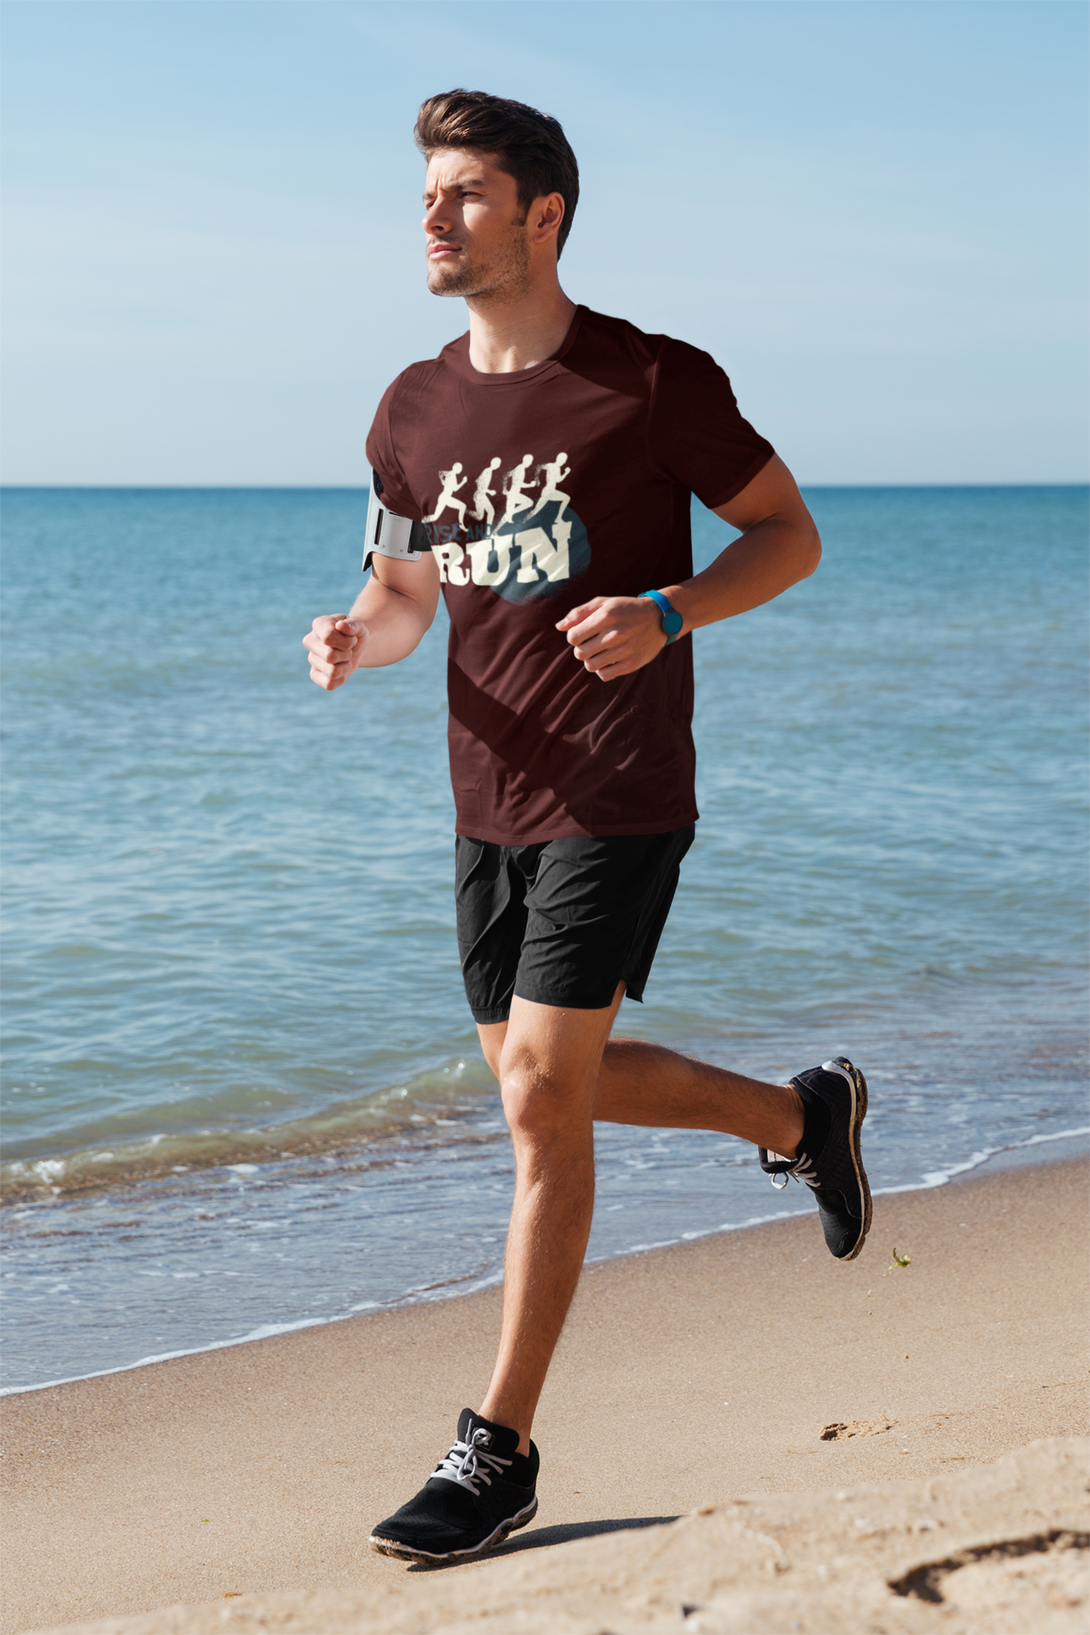 Rise And Run Printed T-Shirt For Men - WowWaves - 3